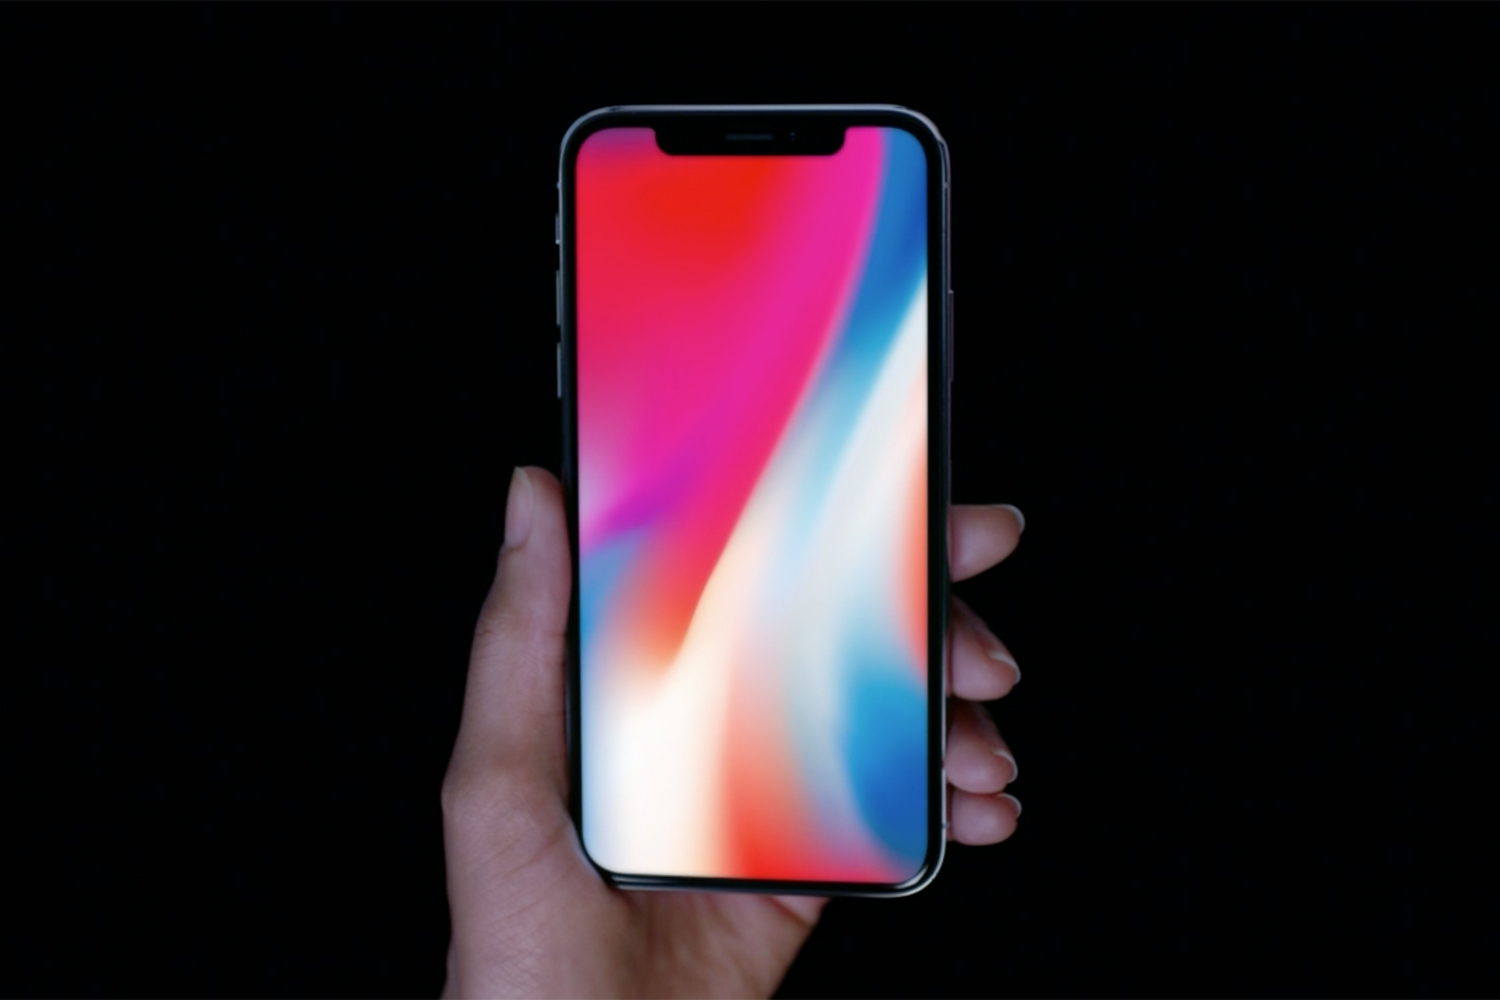 iPhone X users report incoming call delays